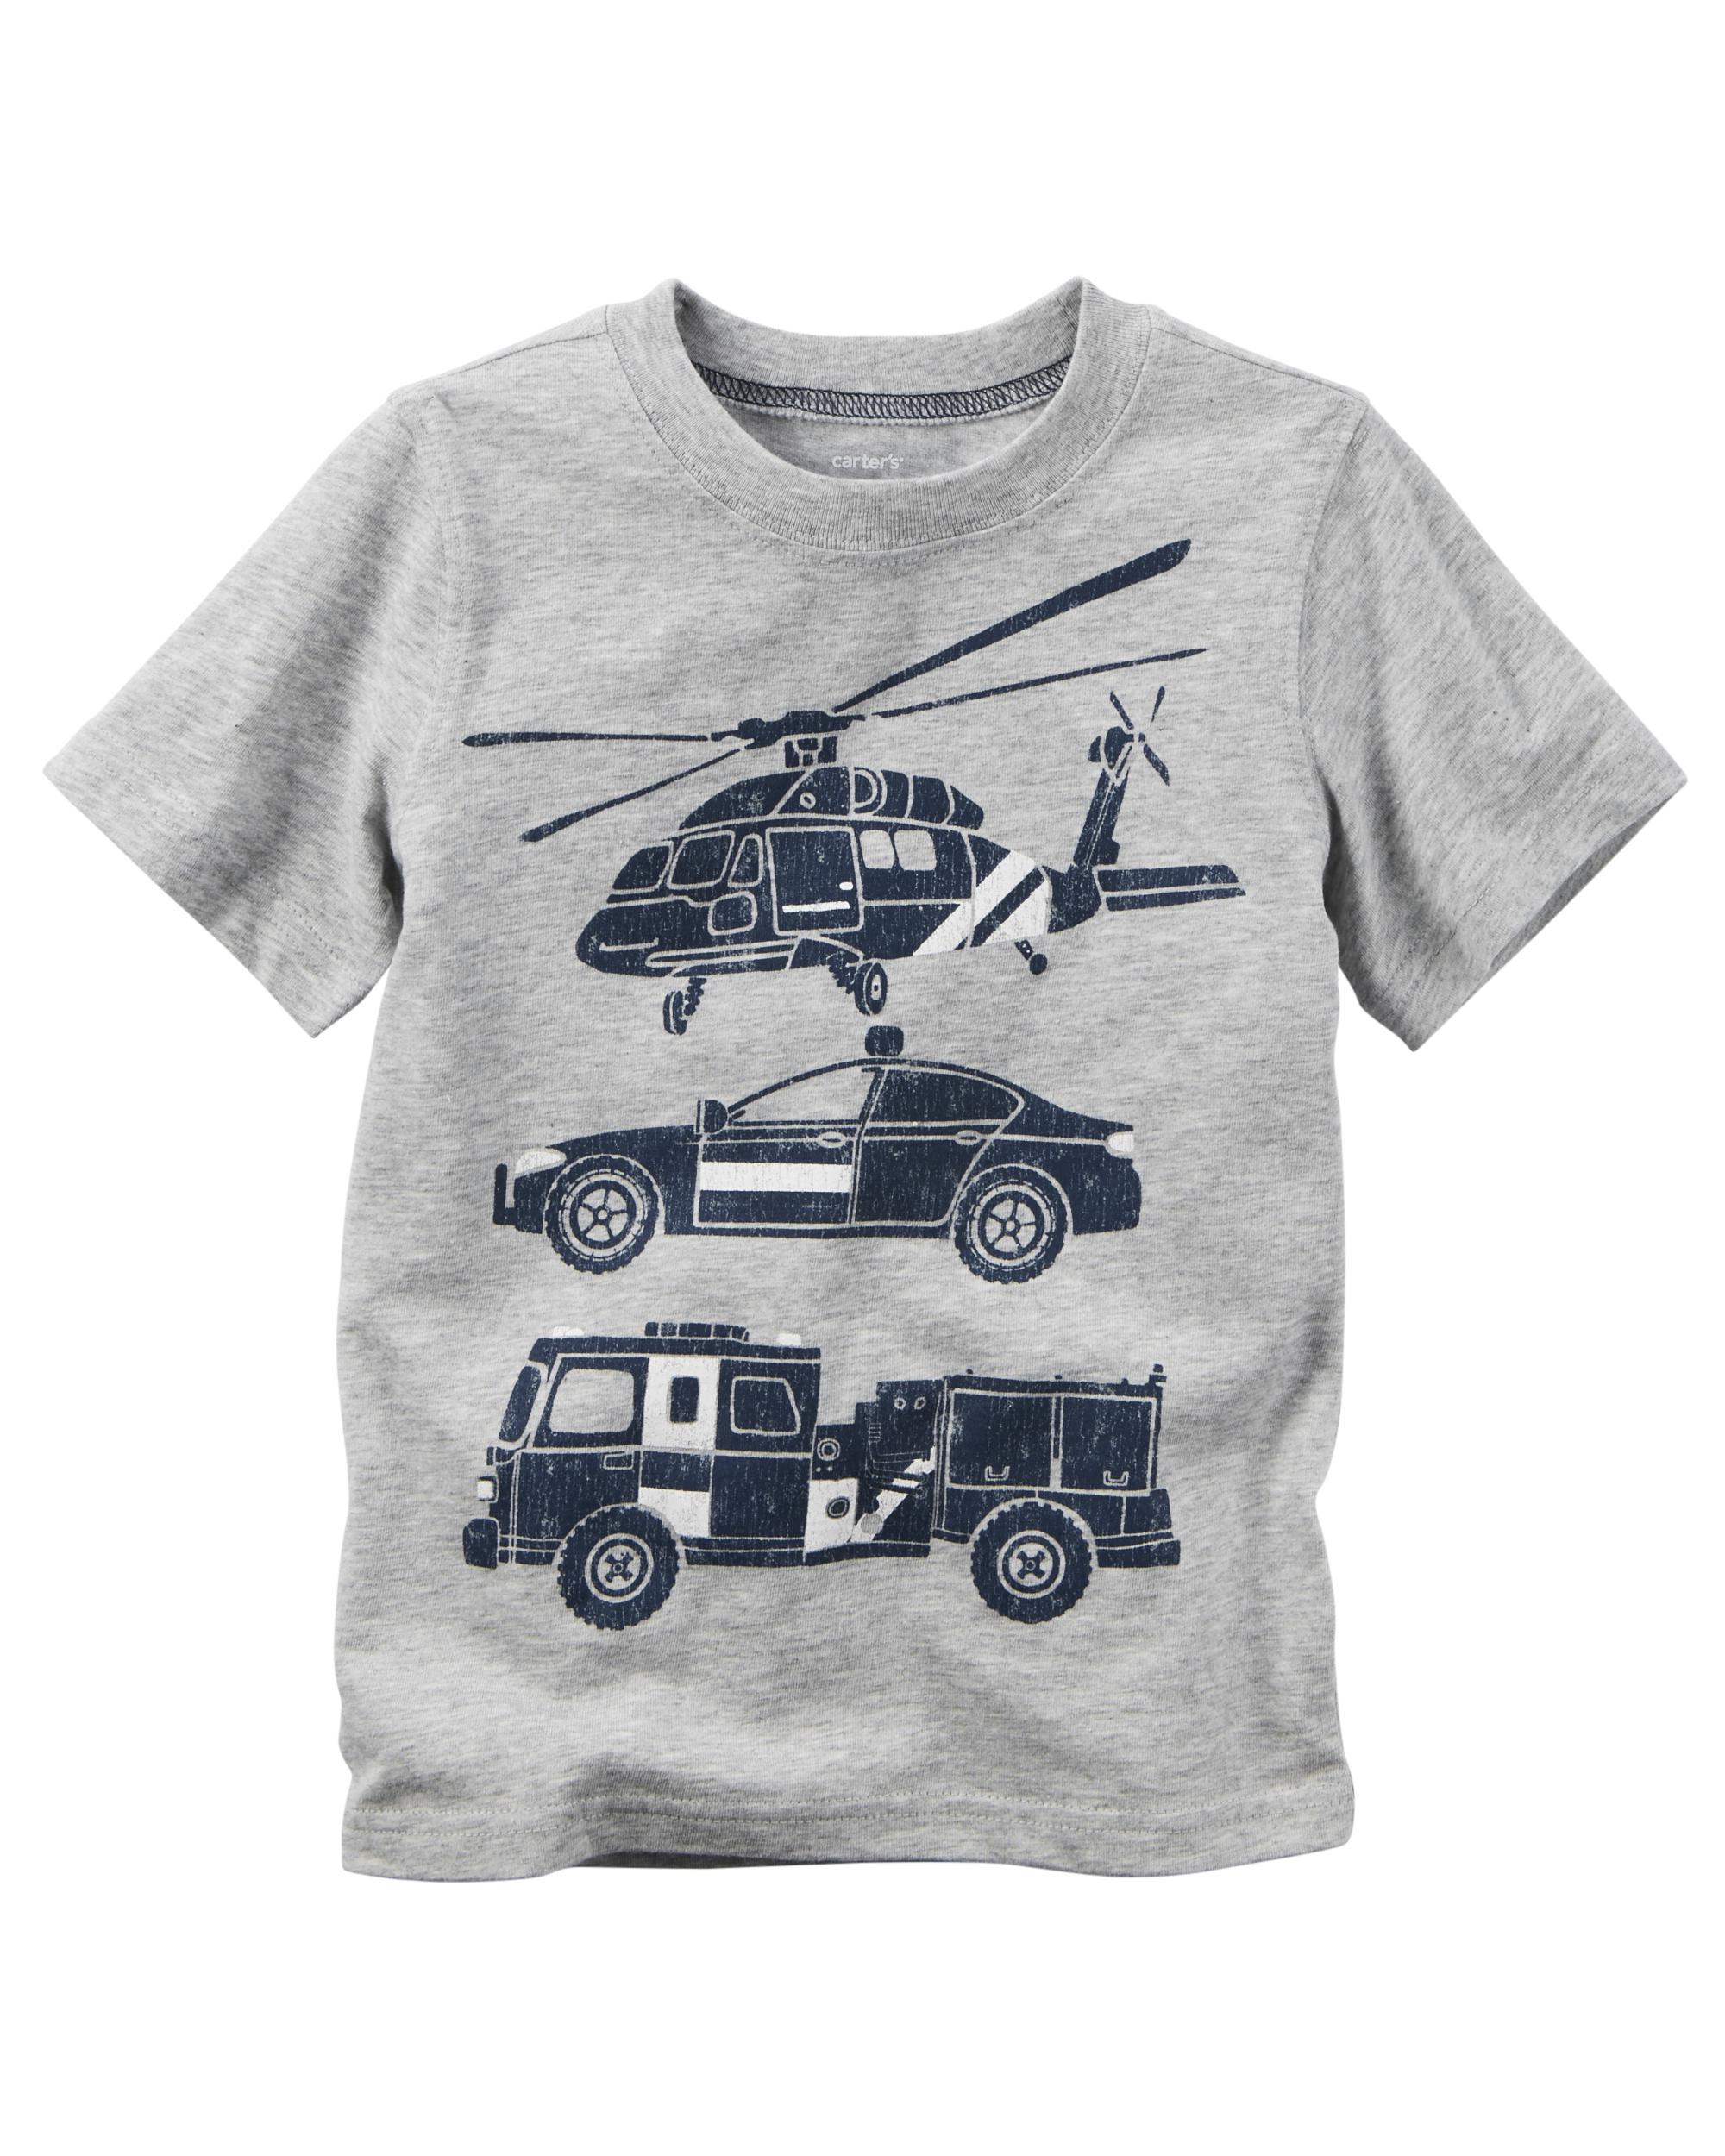 Carter's Toddler Boys' Graphic T-Shirt - Rescue